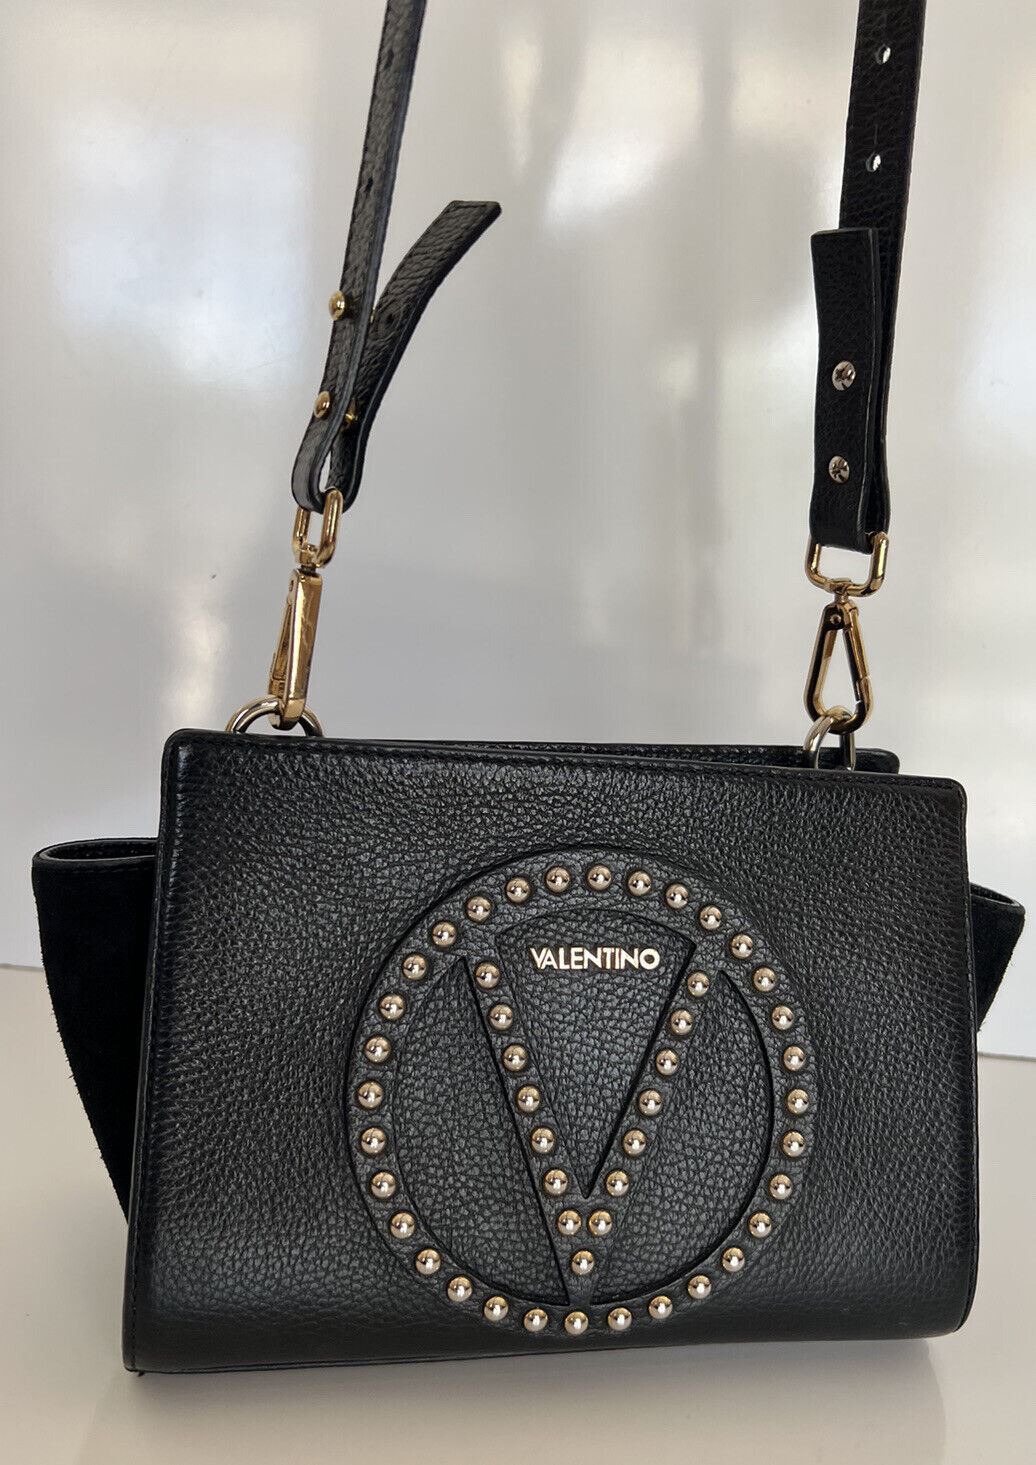 Mario Valentino Leather Chain Black Shoulder Strap studded Bag Made in Italy